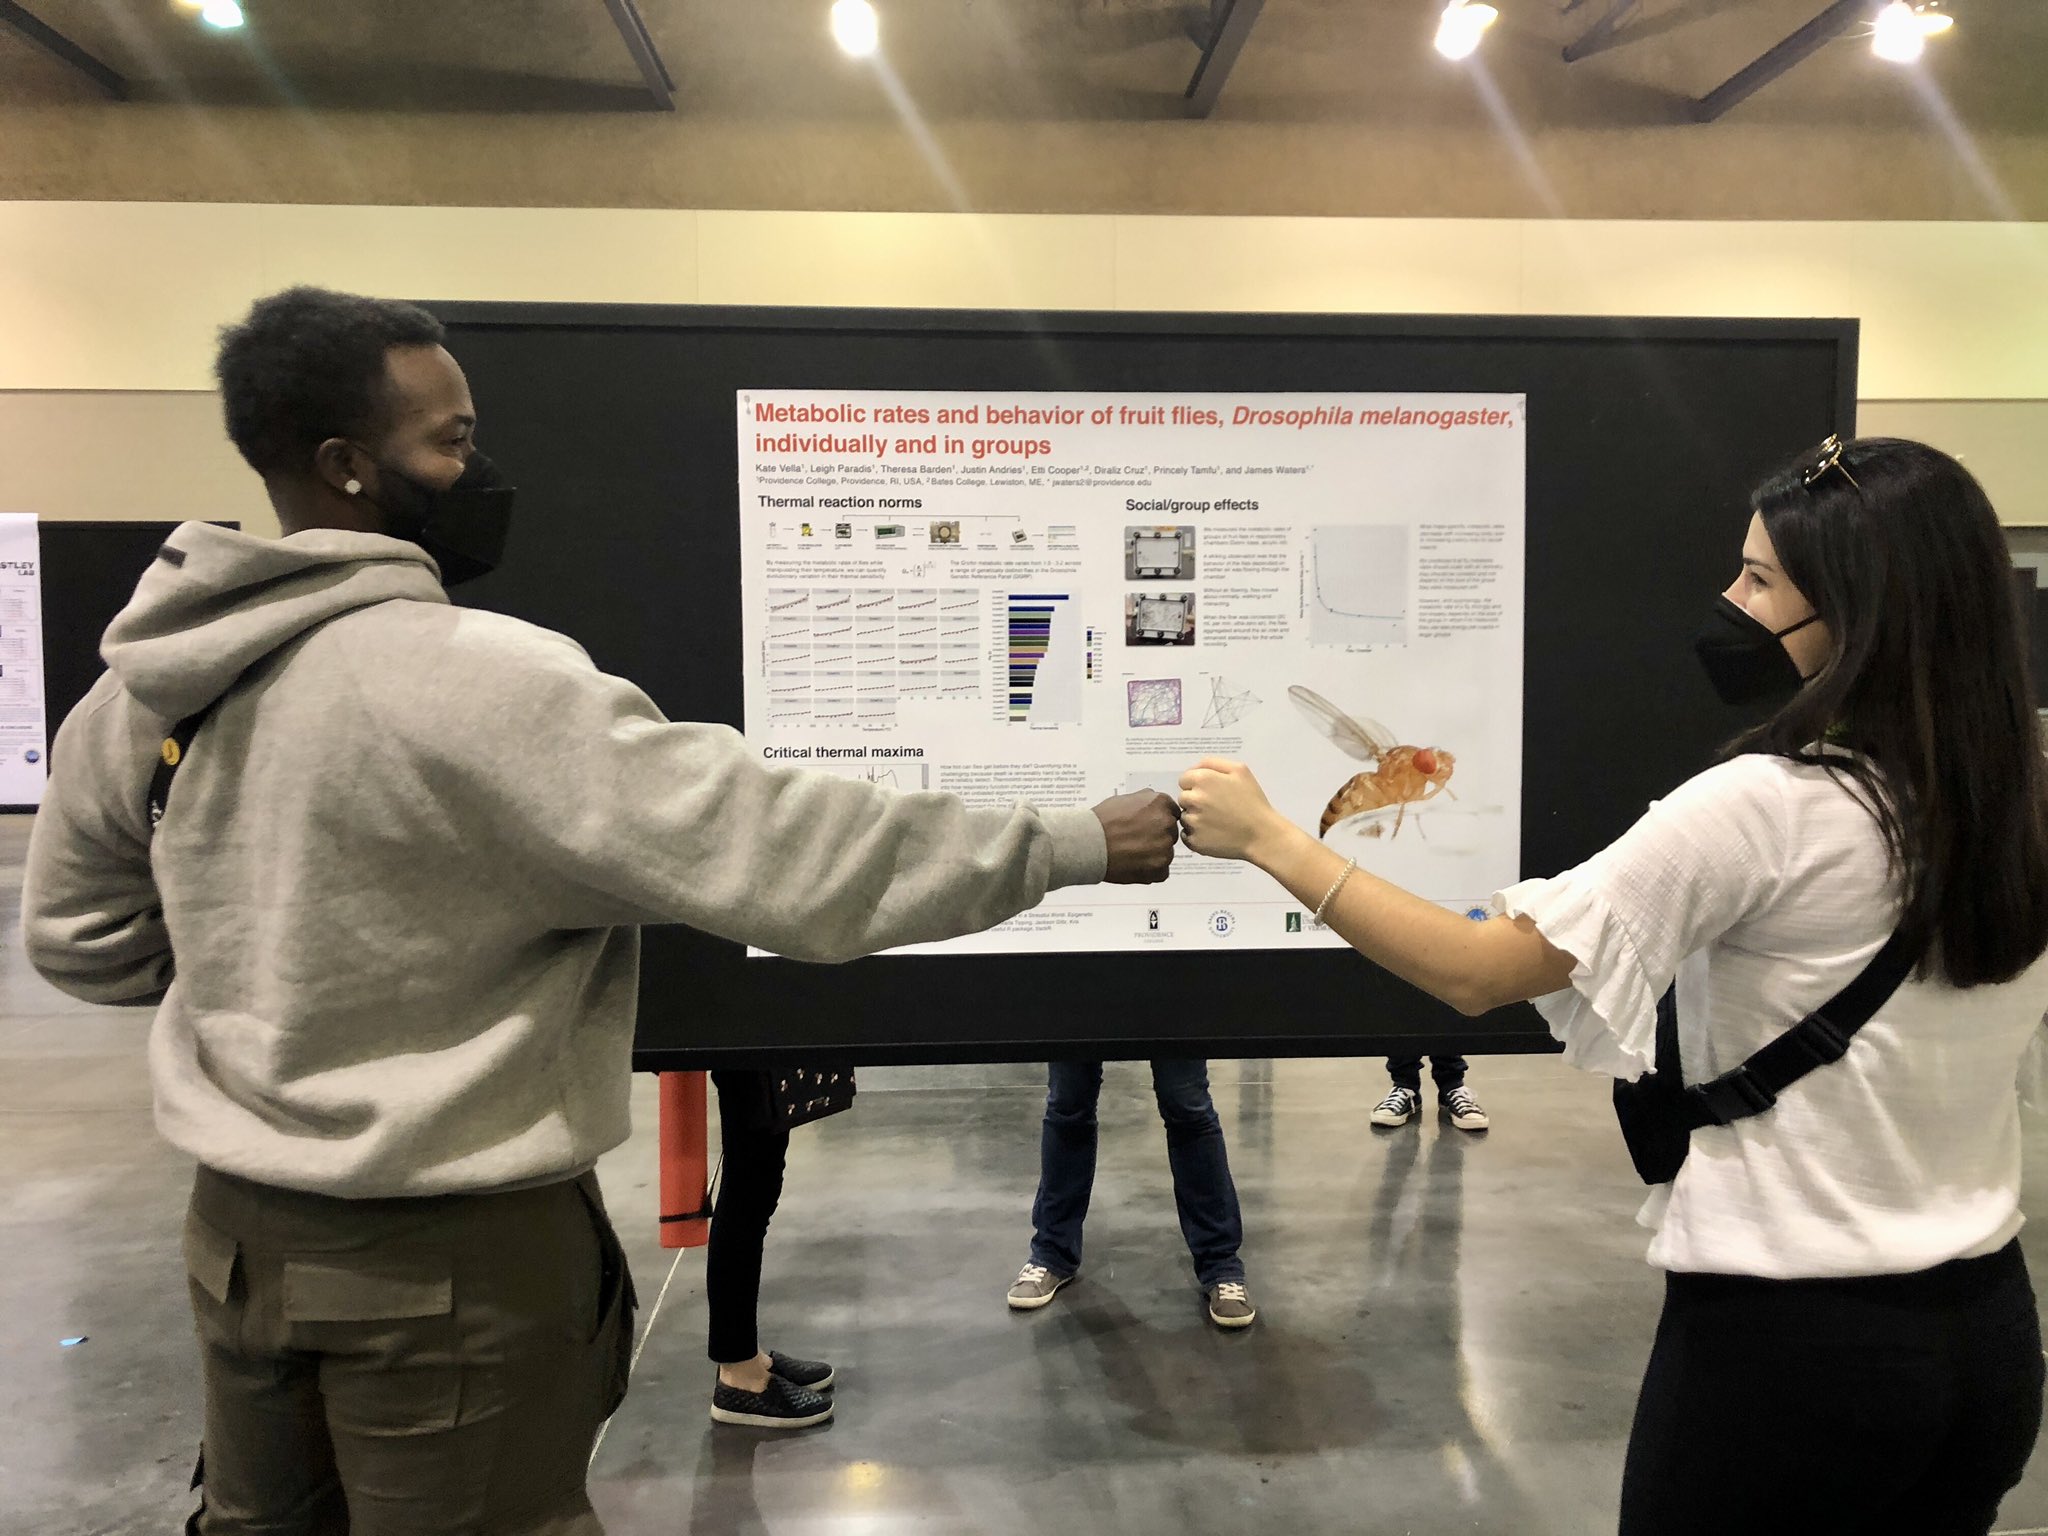 Two presenters fist bump in front of their poster at a scientific conference